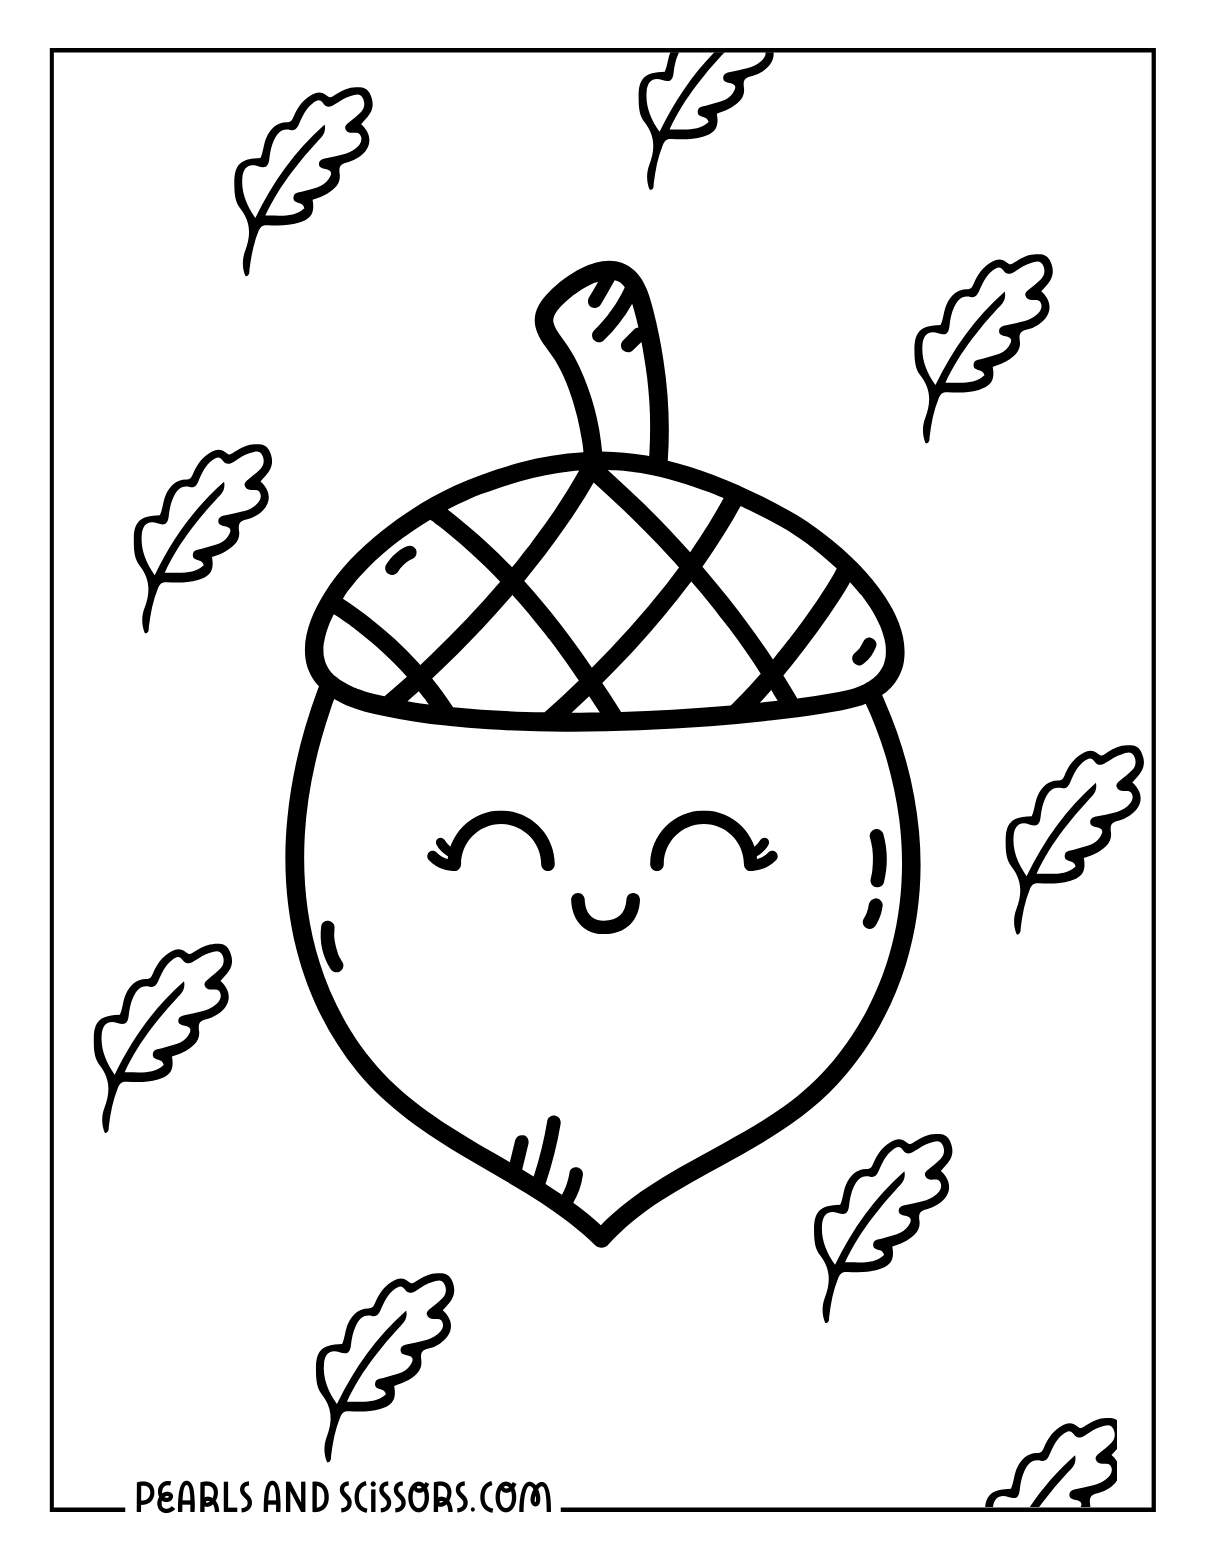 Kawaii acorn thanksgiving coloring page for kids.